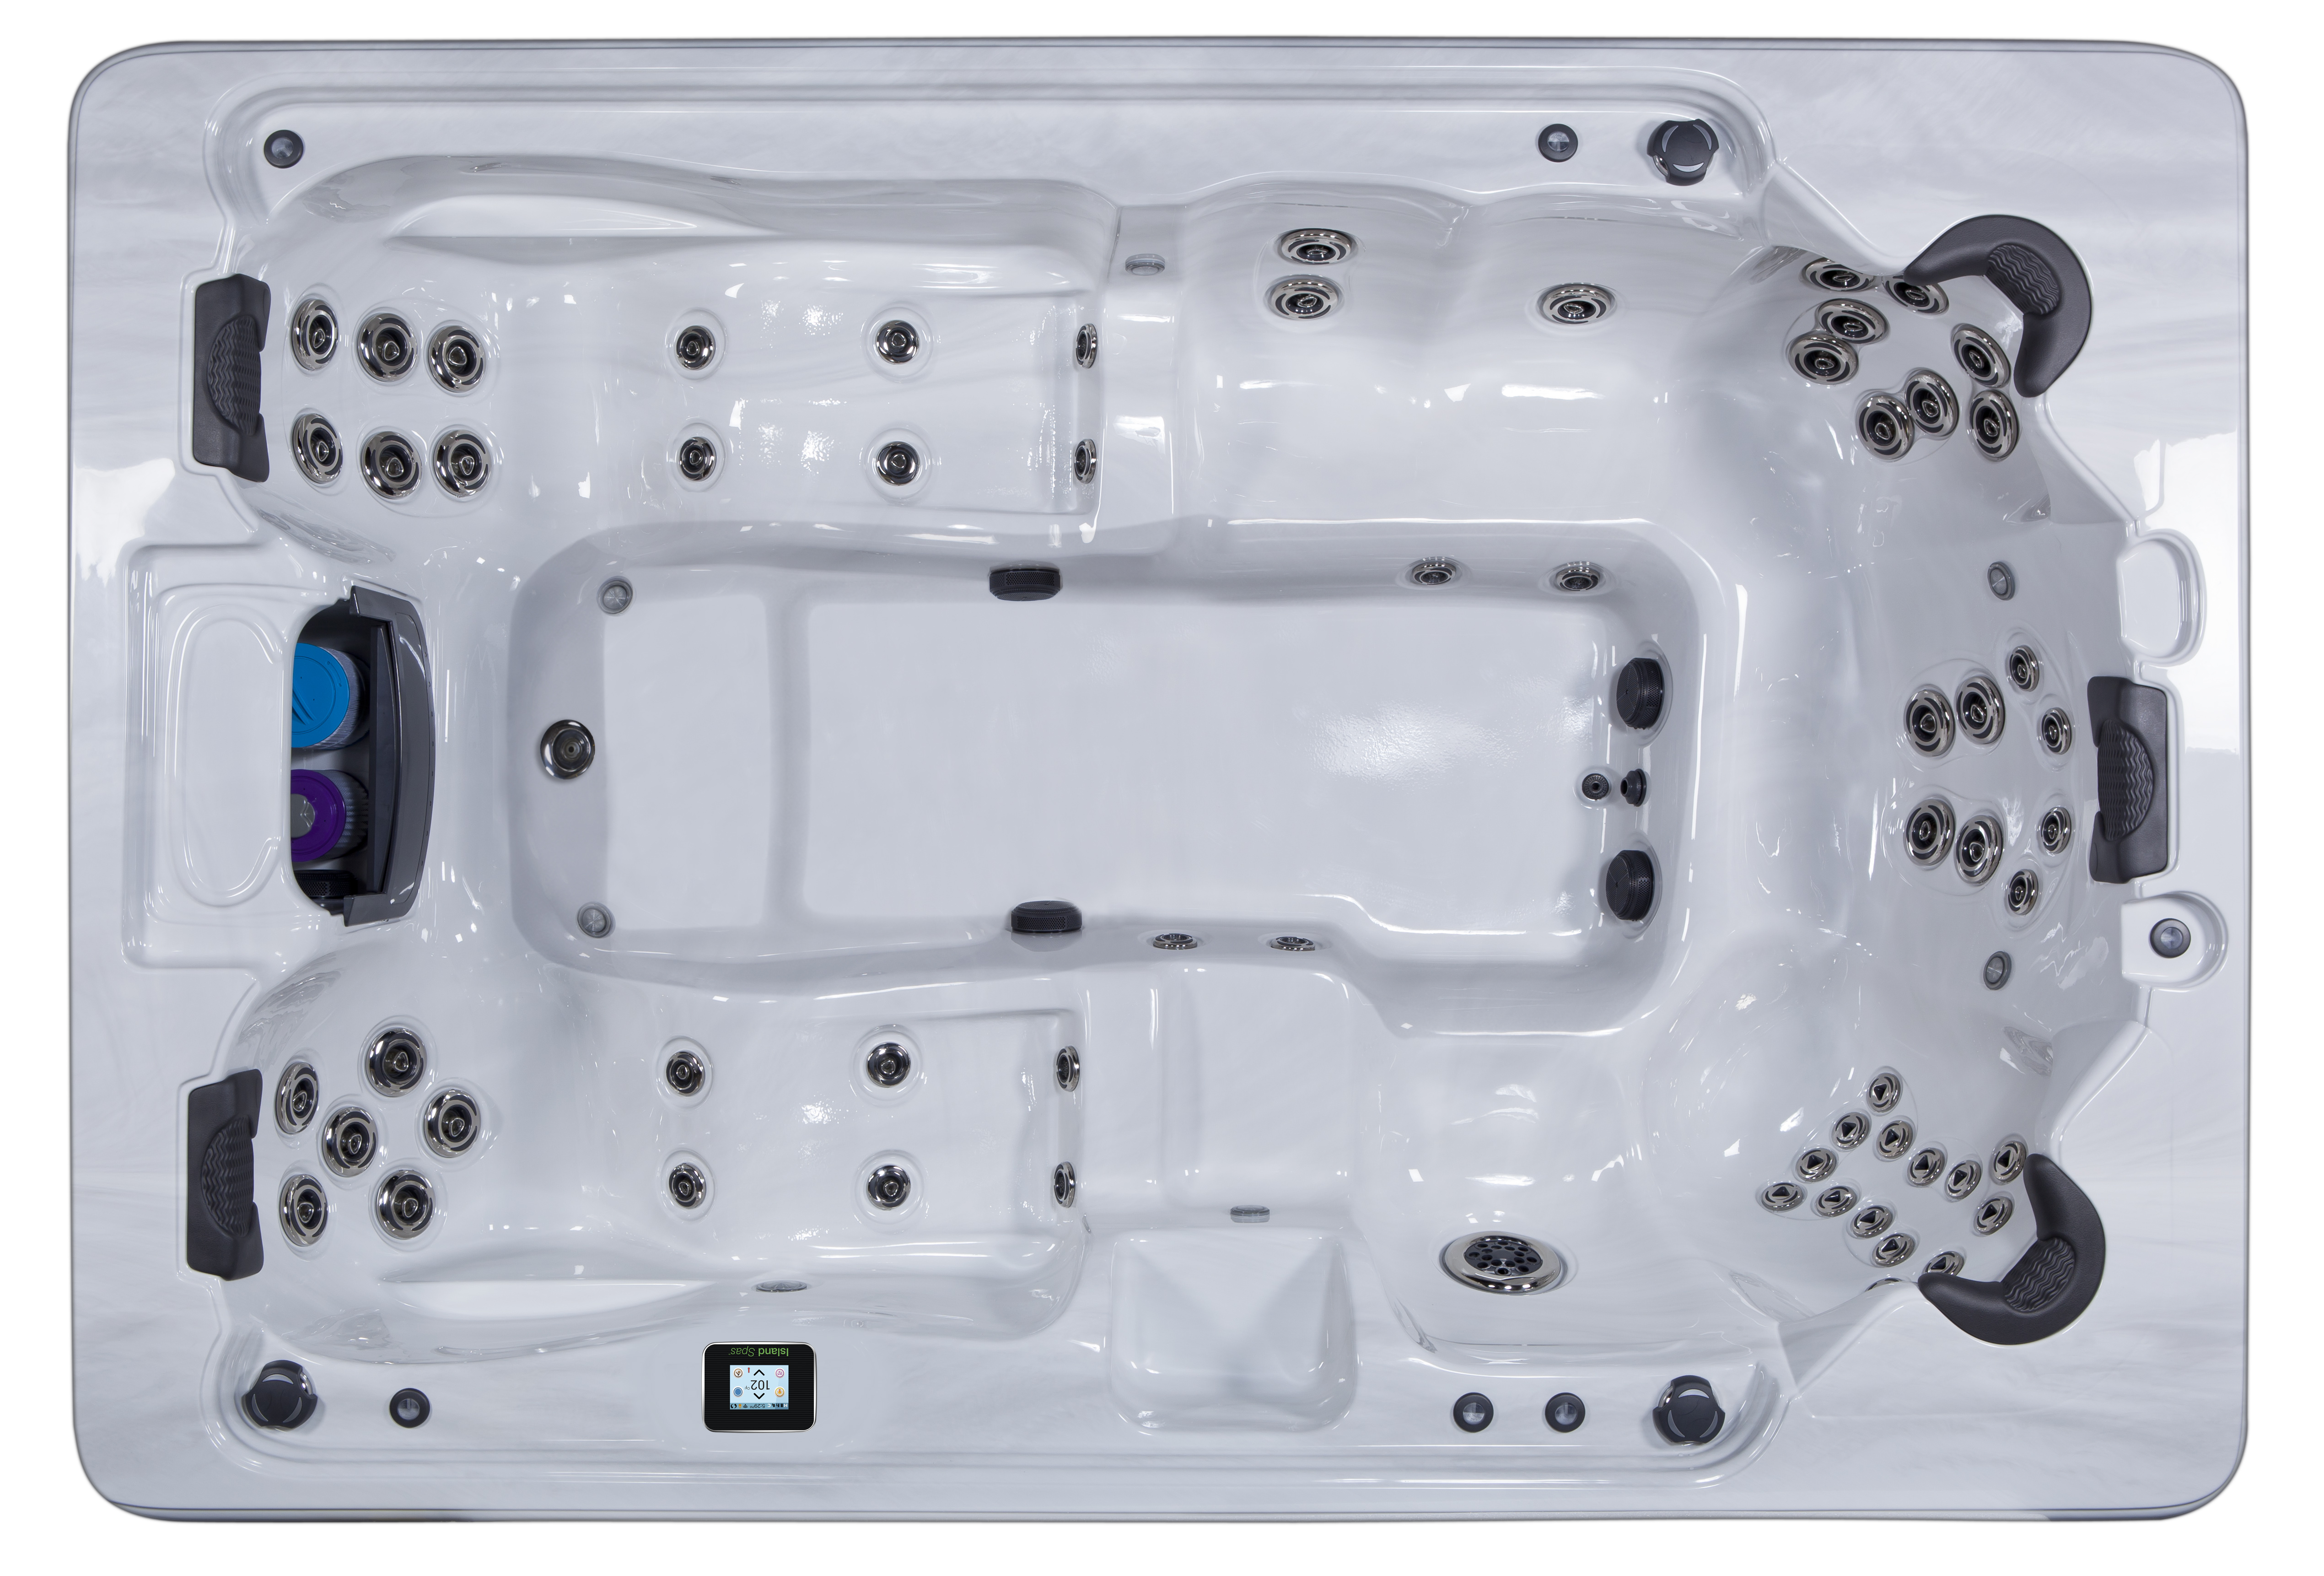 Bimini hot tub with 10 seats and up to 72 jets